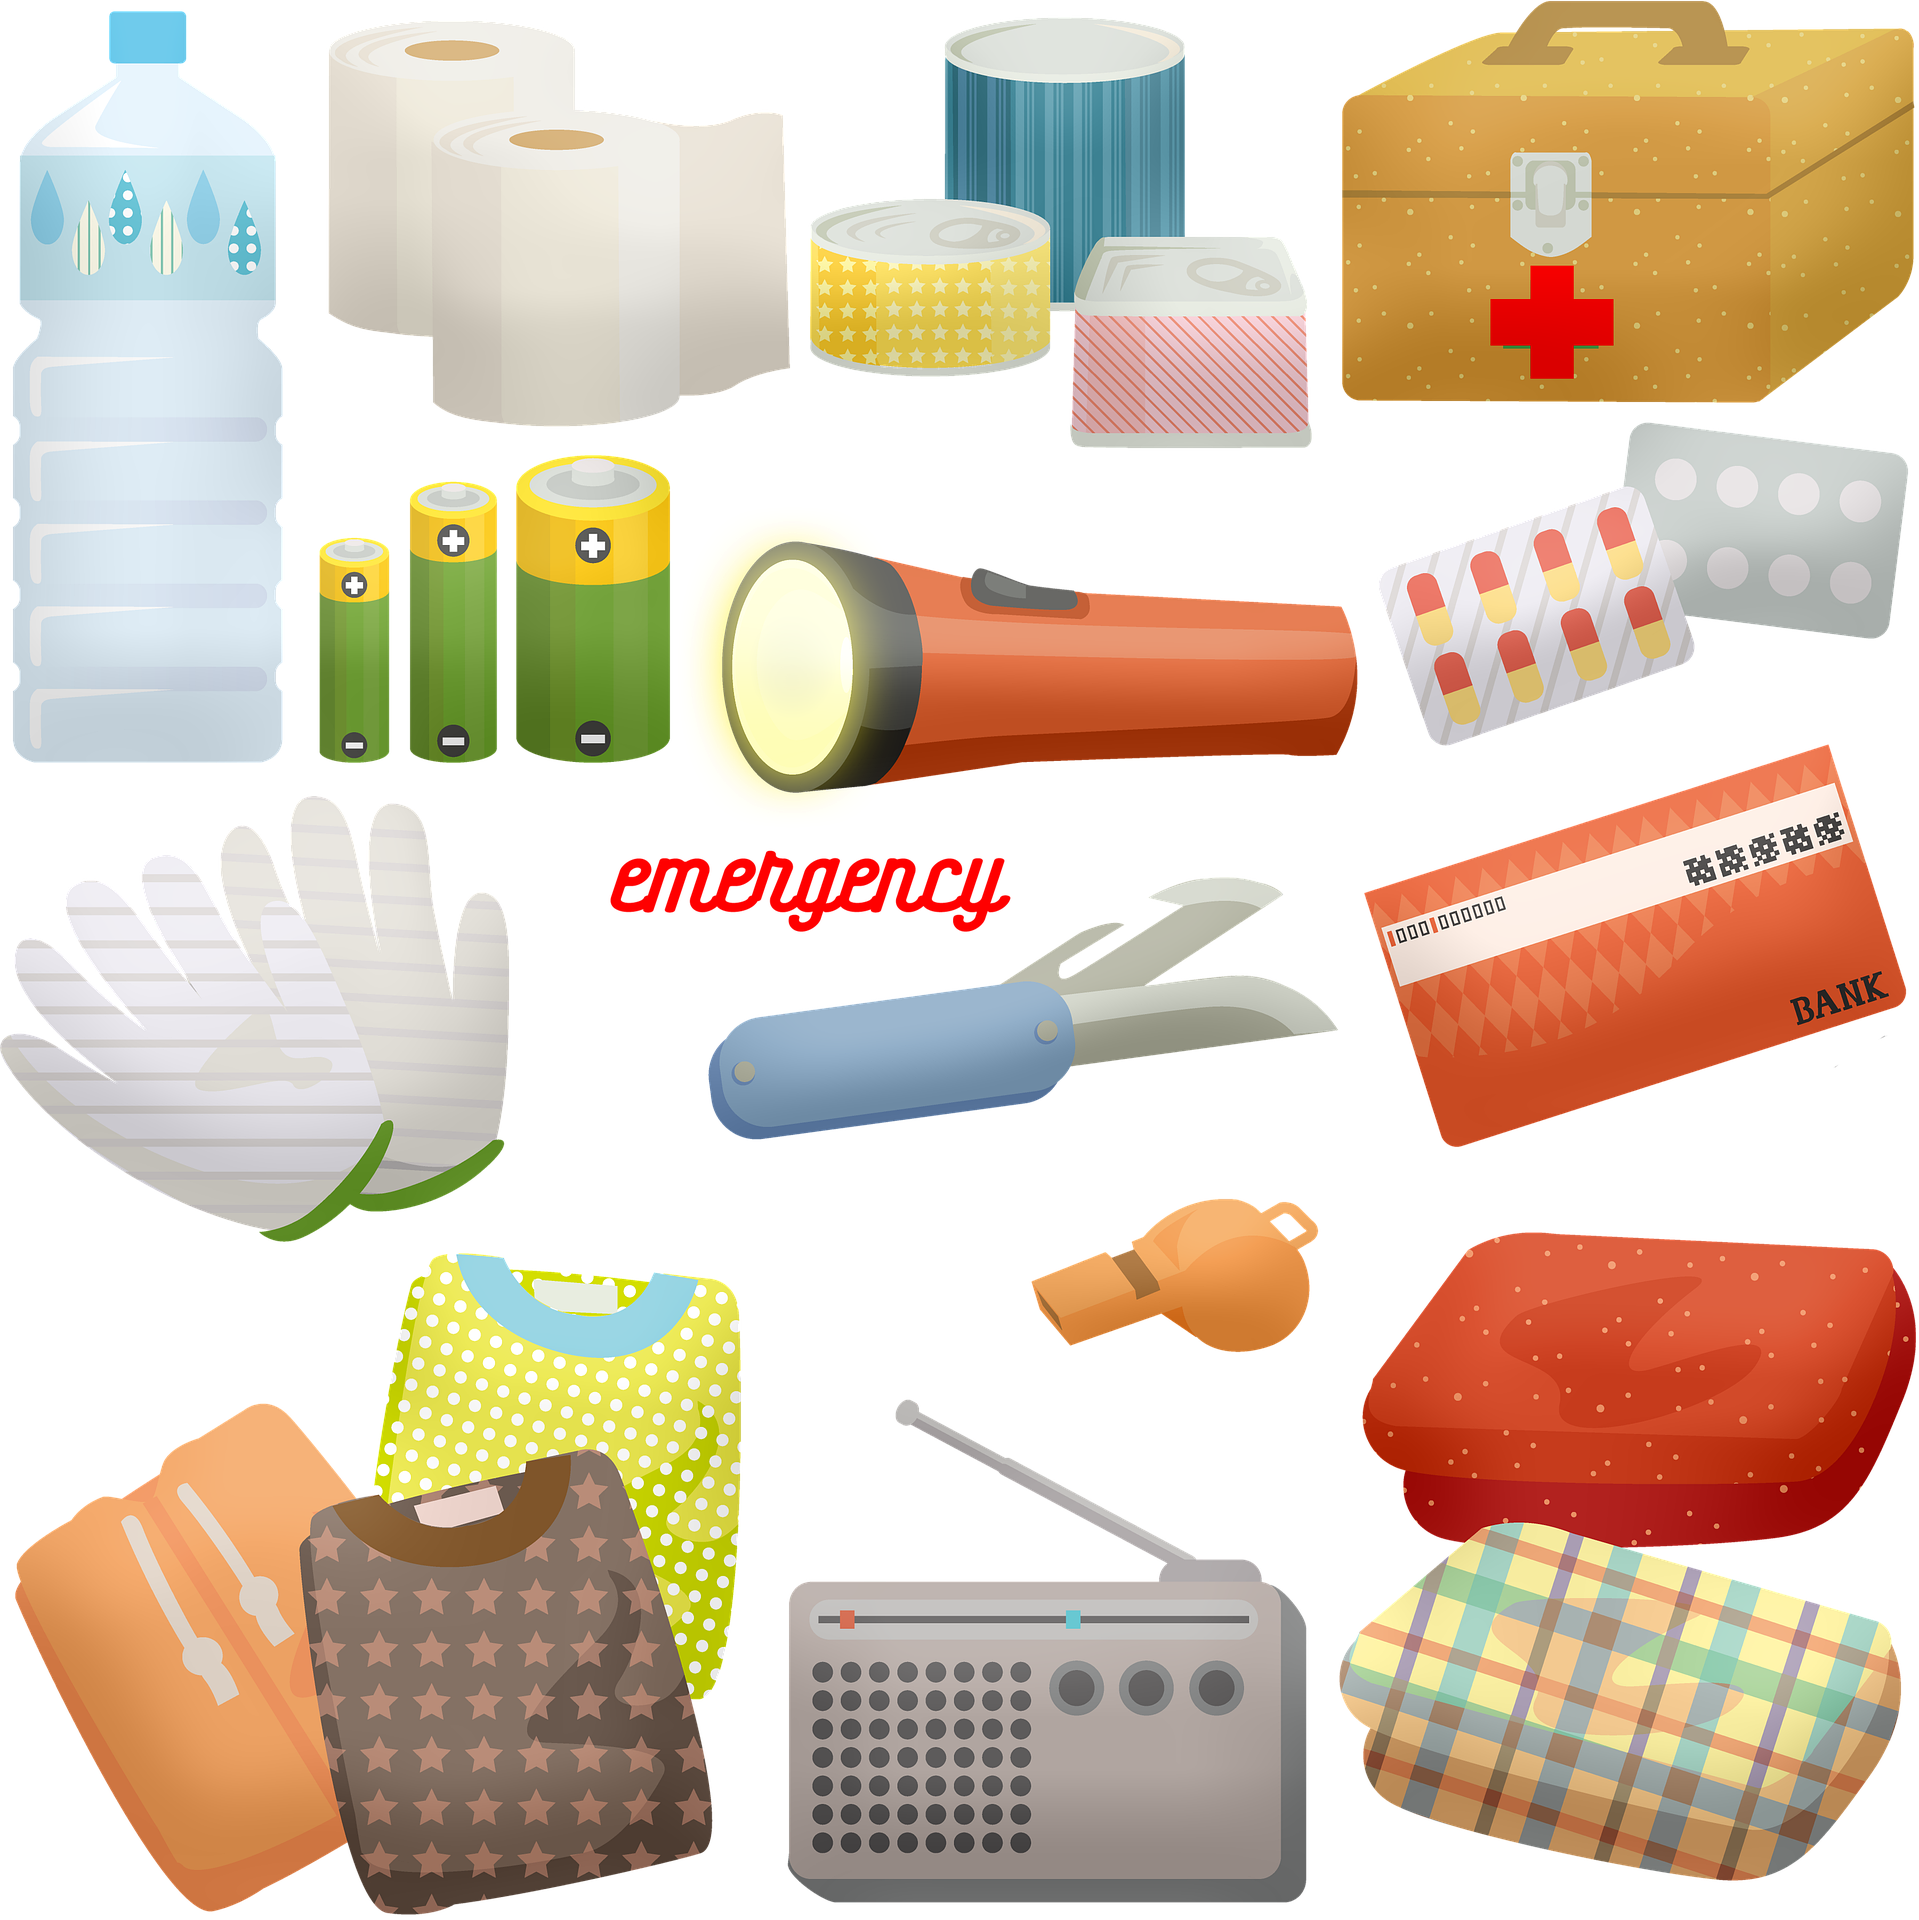 Photo of objects for emergency supplies